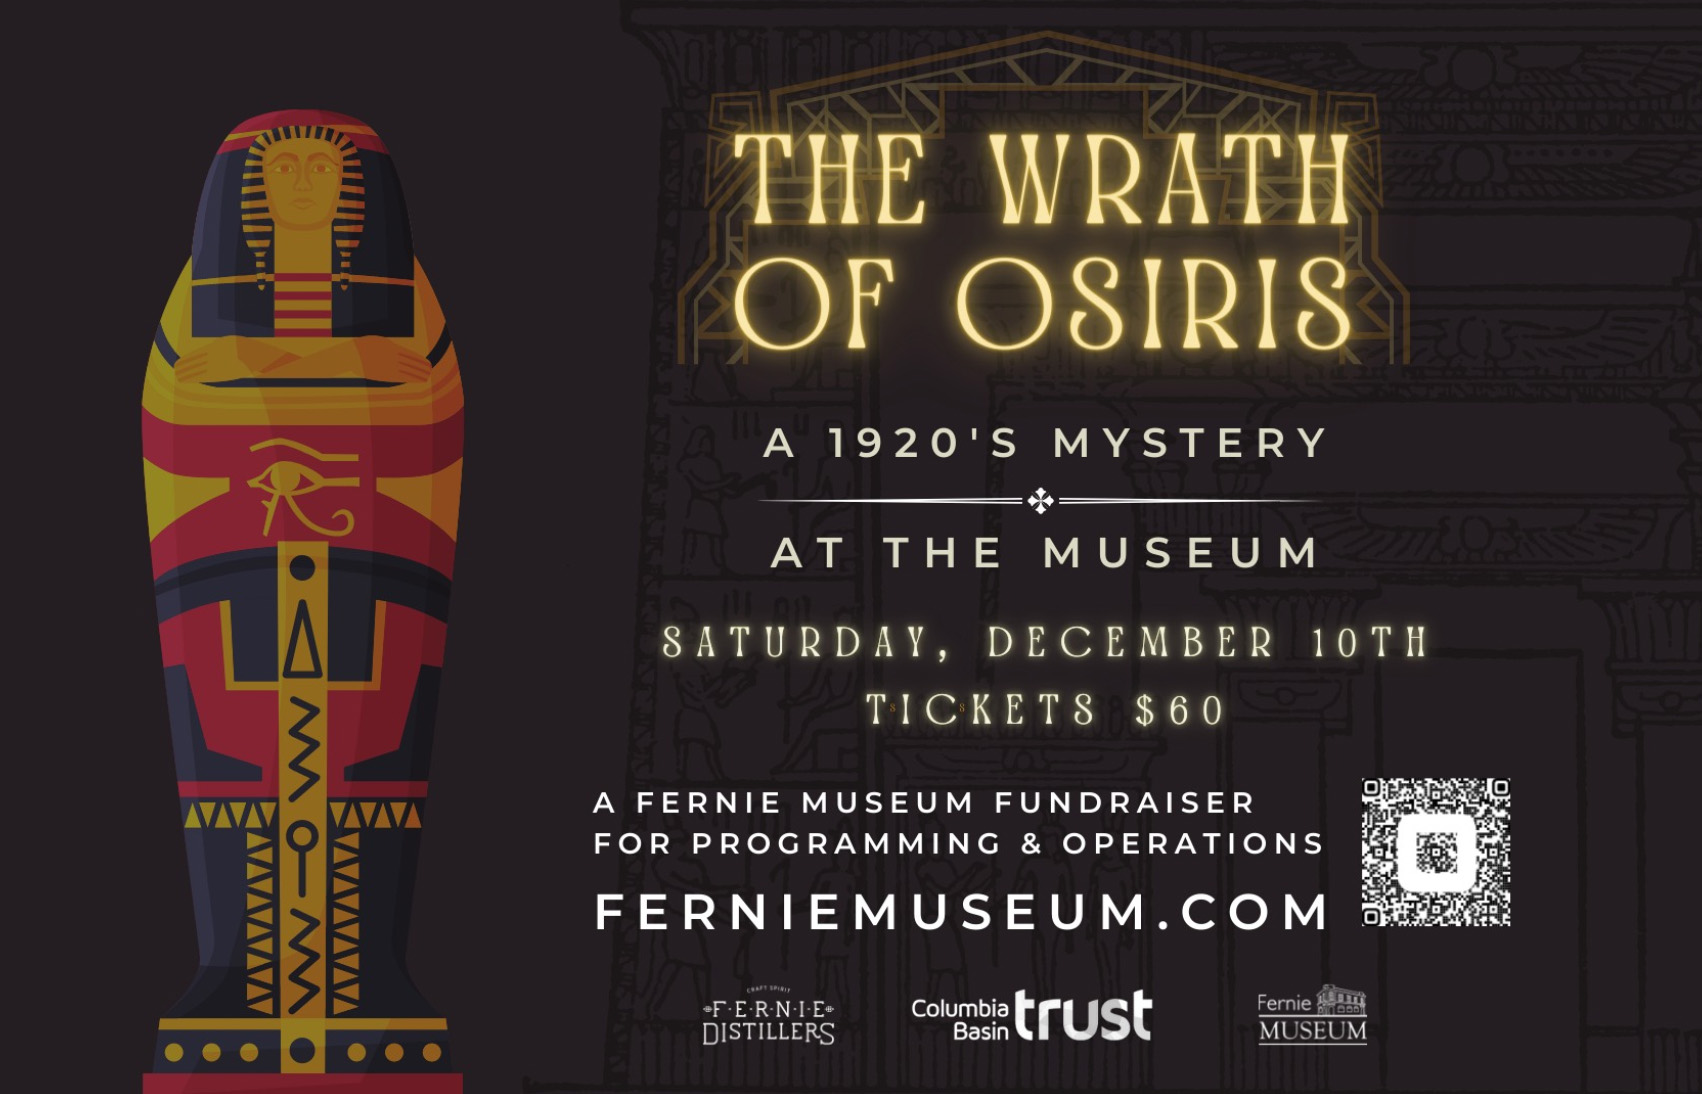 The Wrath of Osiris: A 1920's Mystery at the Museum